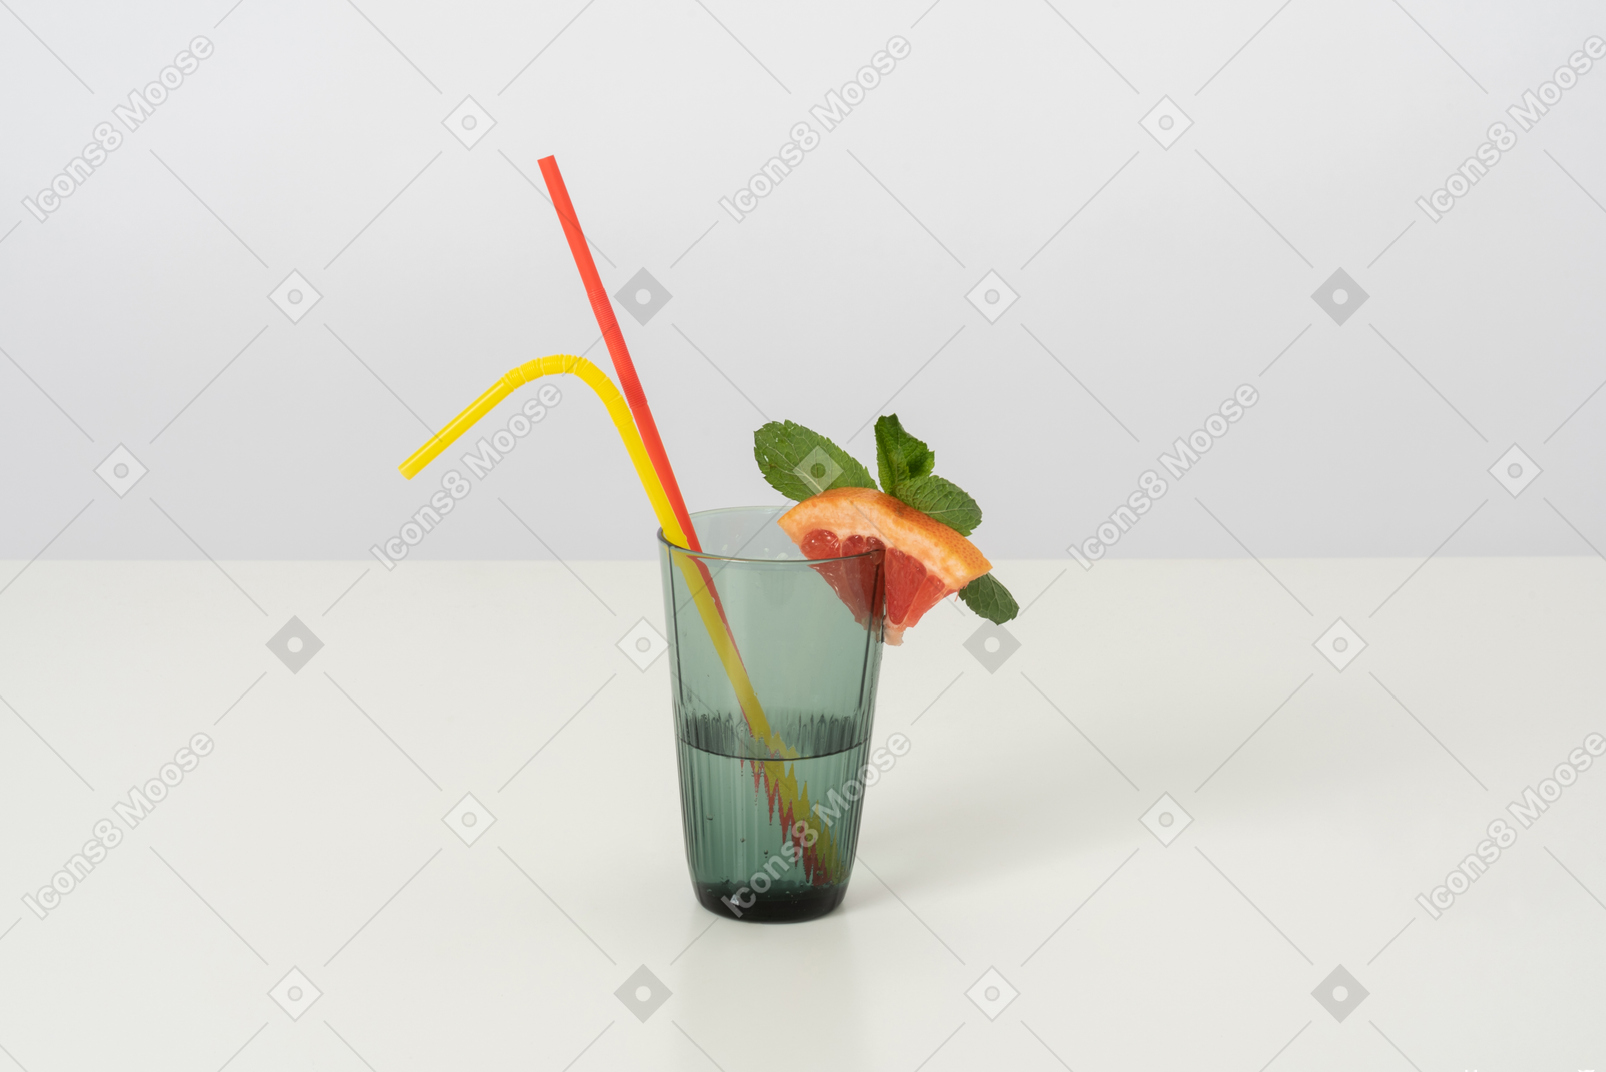 A glass of cold water with a slice of grapefruit and some mint leaves on it, with two colorful plastic straws because drinking from both at the same time is double fun